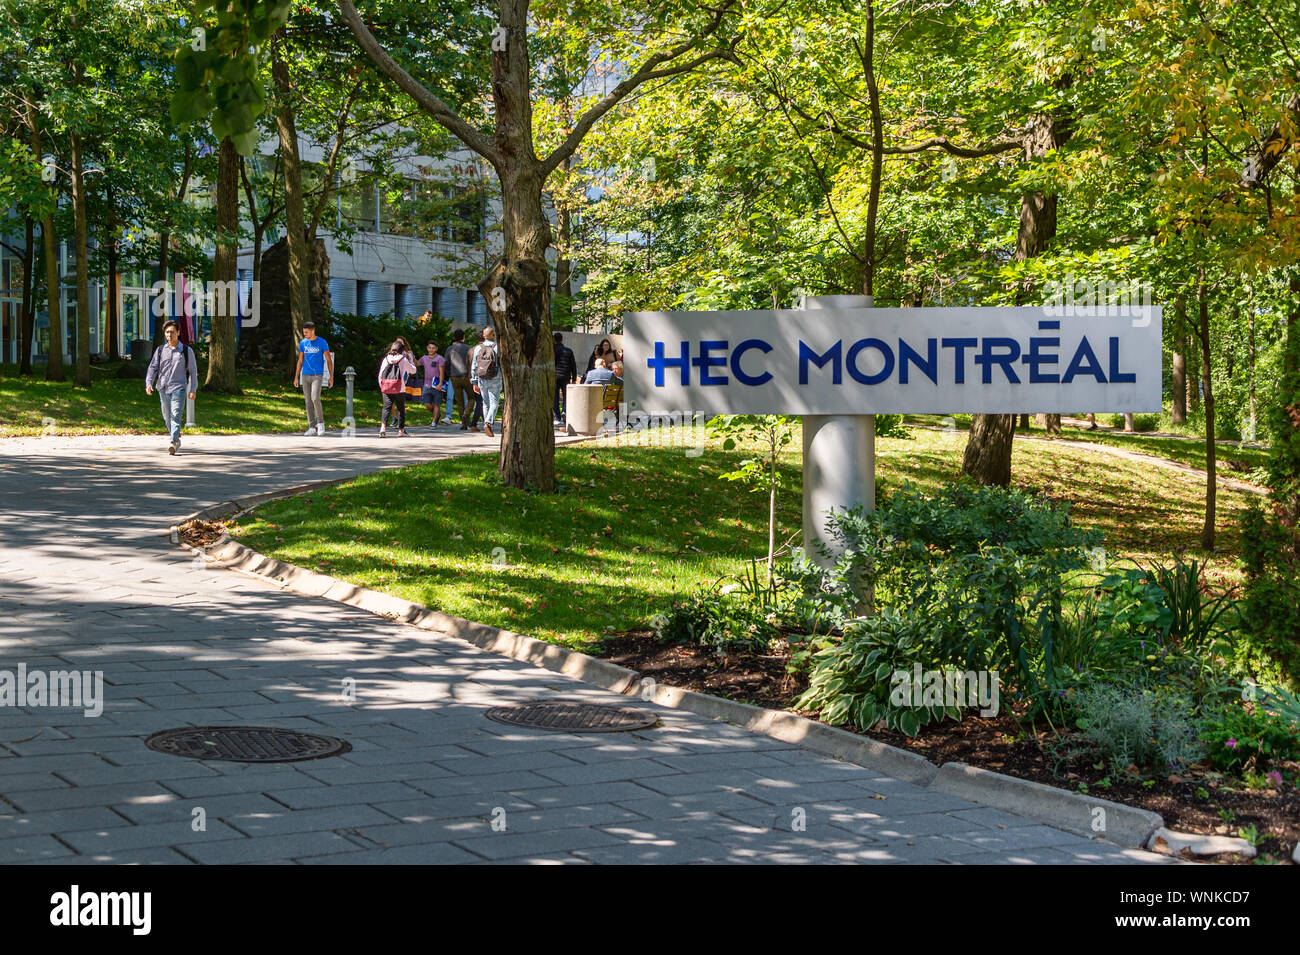 Montreal, CA - 5 September 2019: students passing by HEC Montreal sign Stock Photo